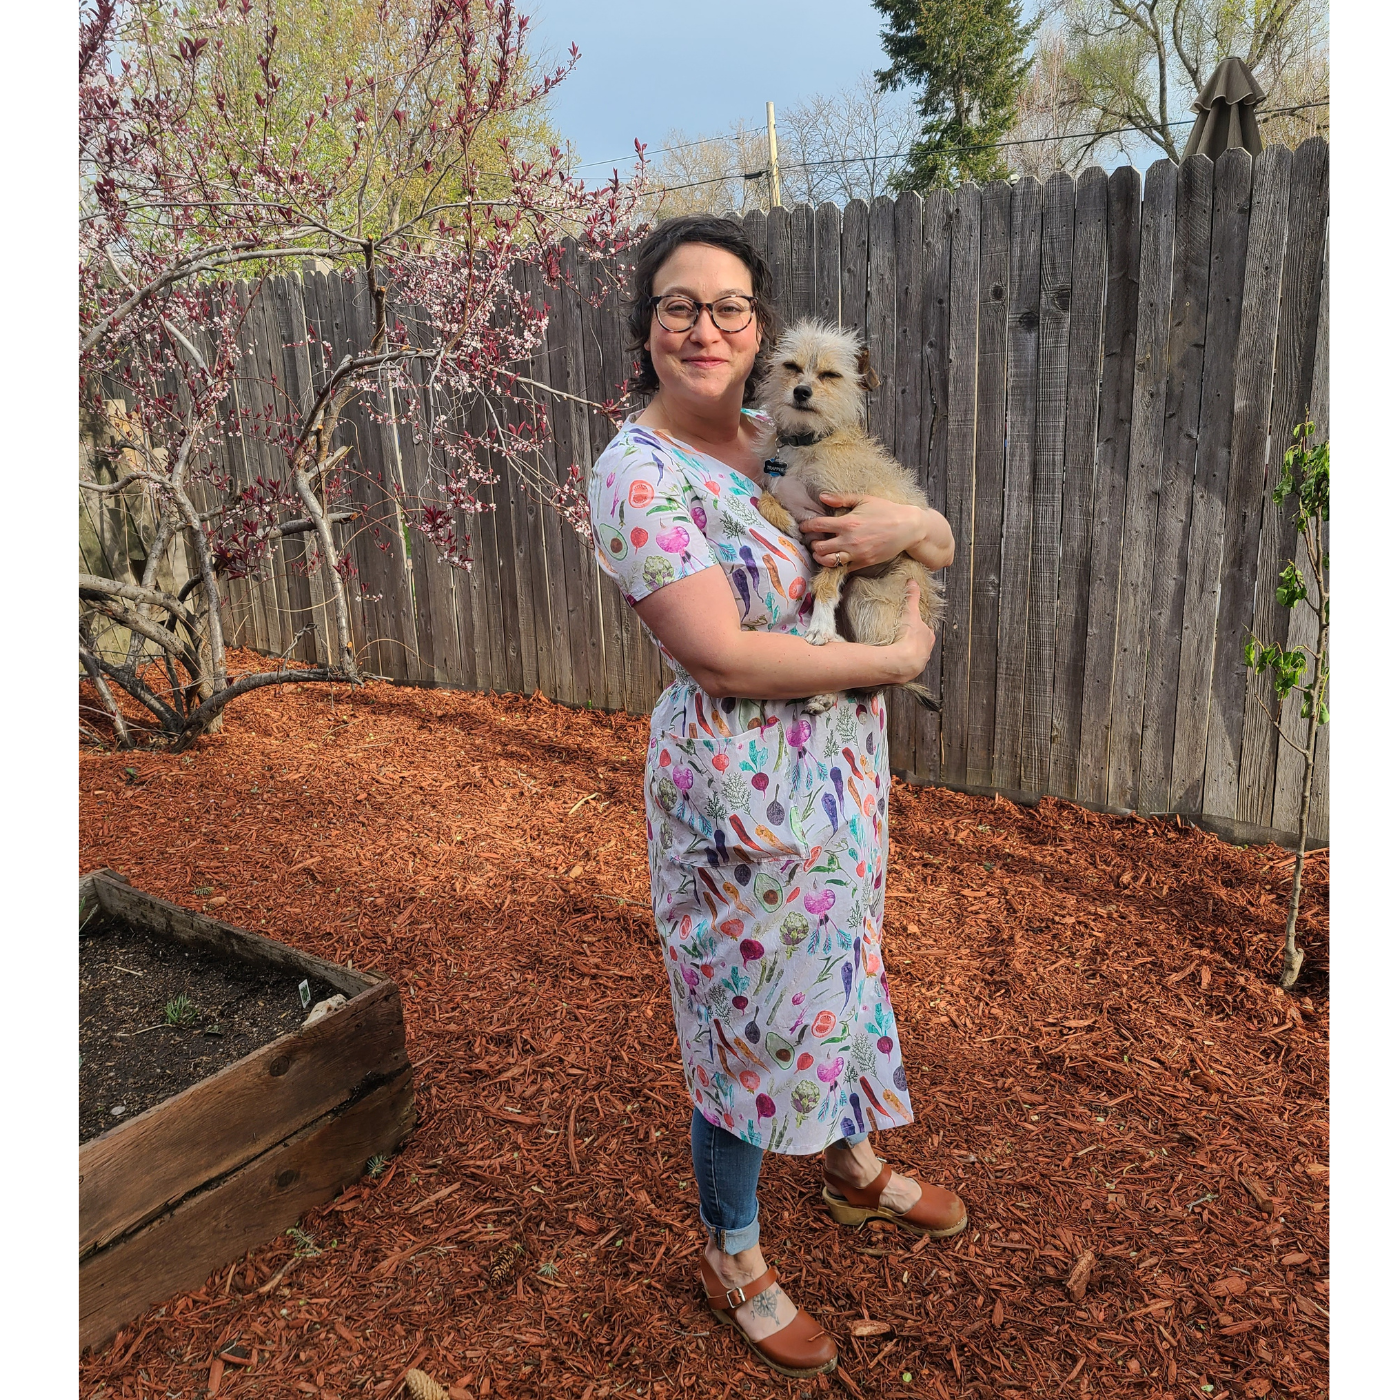 Angela stands looking at the camera and smiling and holding a small furry tan dog. She is wearing a dress with a cream background and small rainbow vegetables all over it. She is wearing the dress over pants and standing in the mulch as if in a backyard near a brown wooden fence.